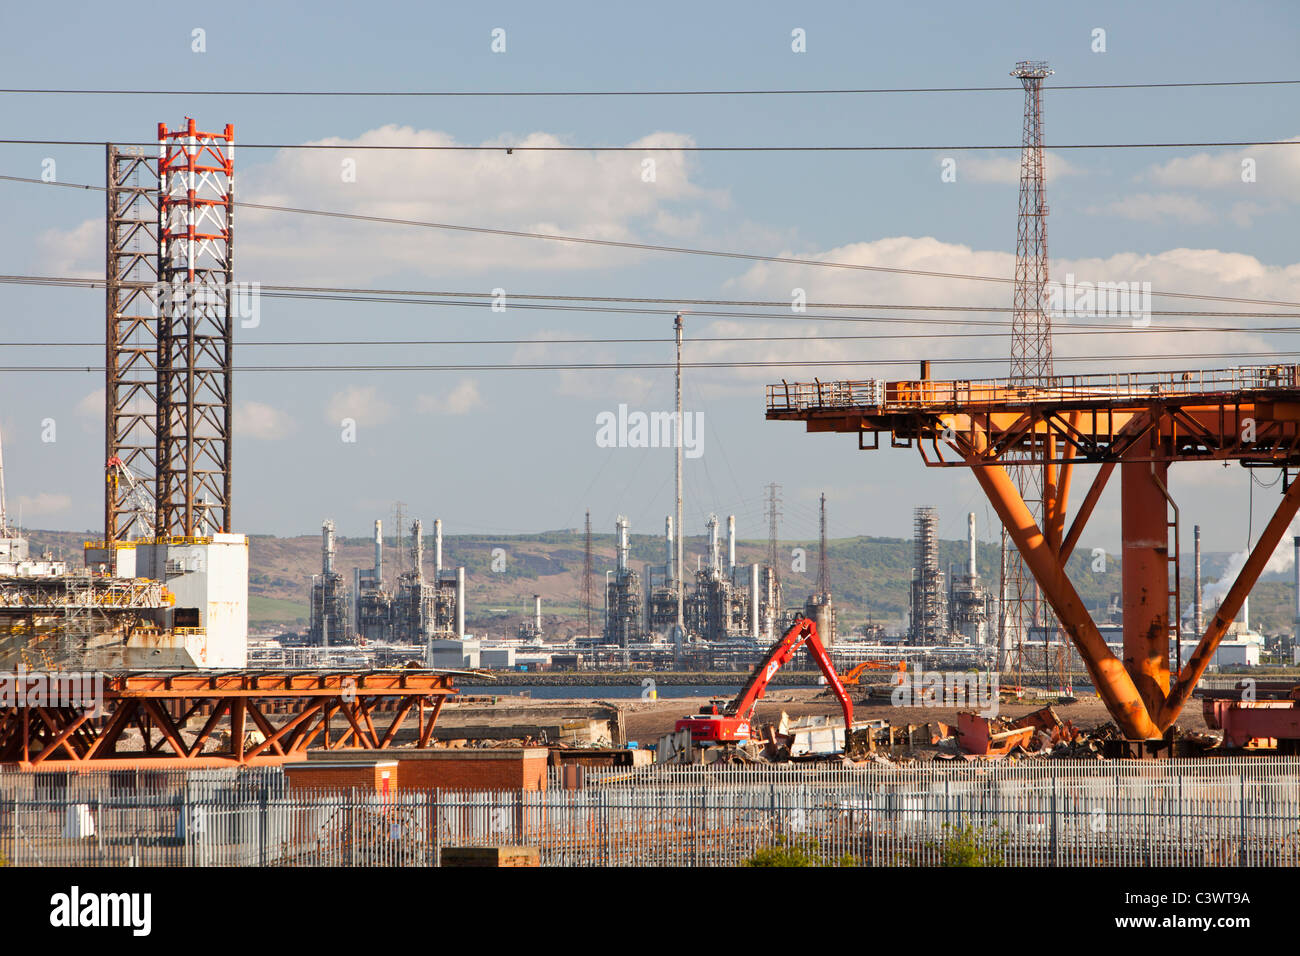 An old oil rigg and Jack up barge being dismantled at Able UK's ship dismantling plant at Seal Sands on Teeside, UK. Stock Photo